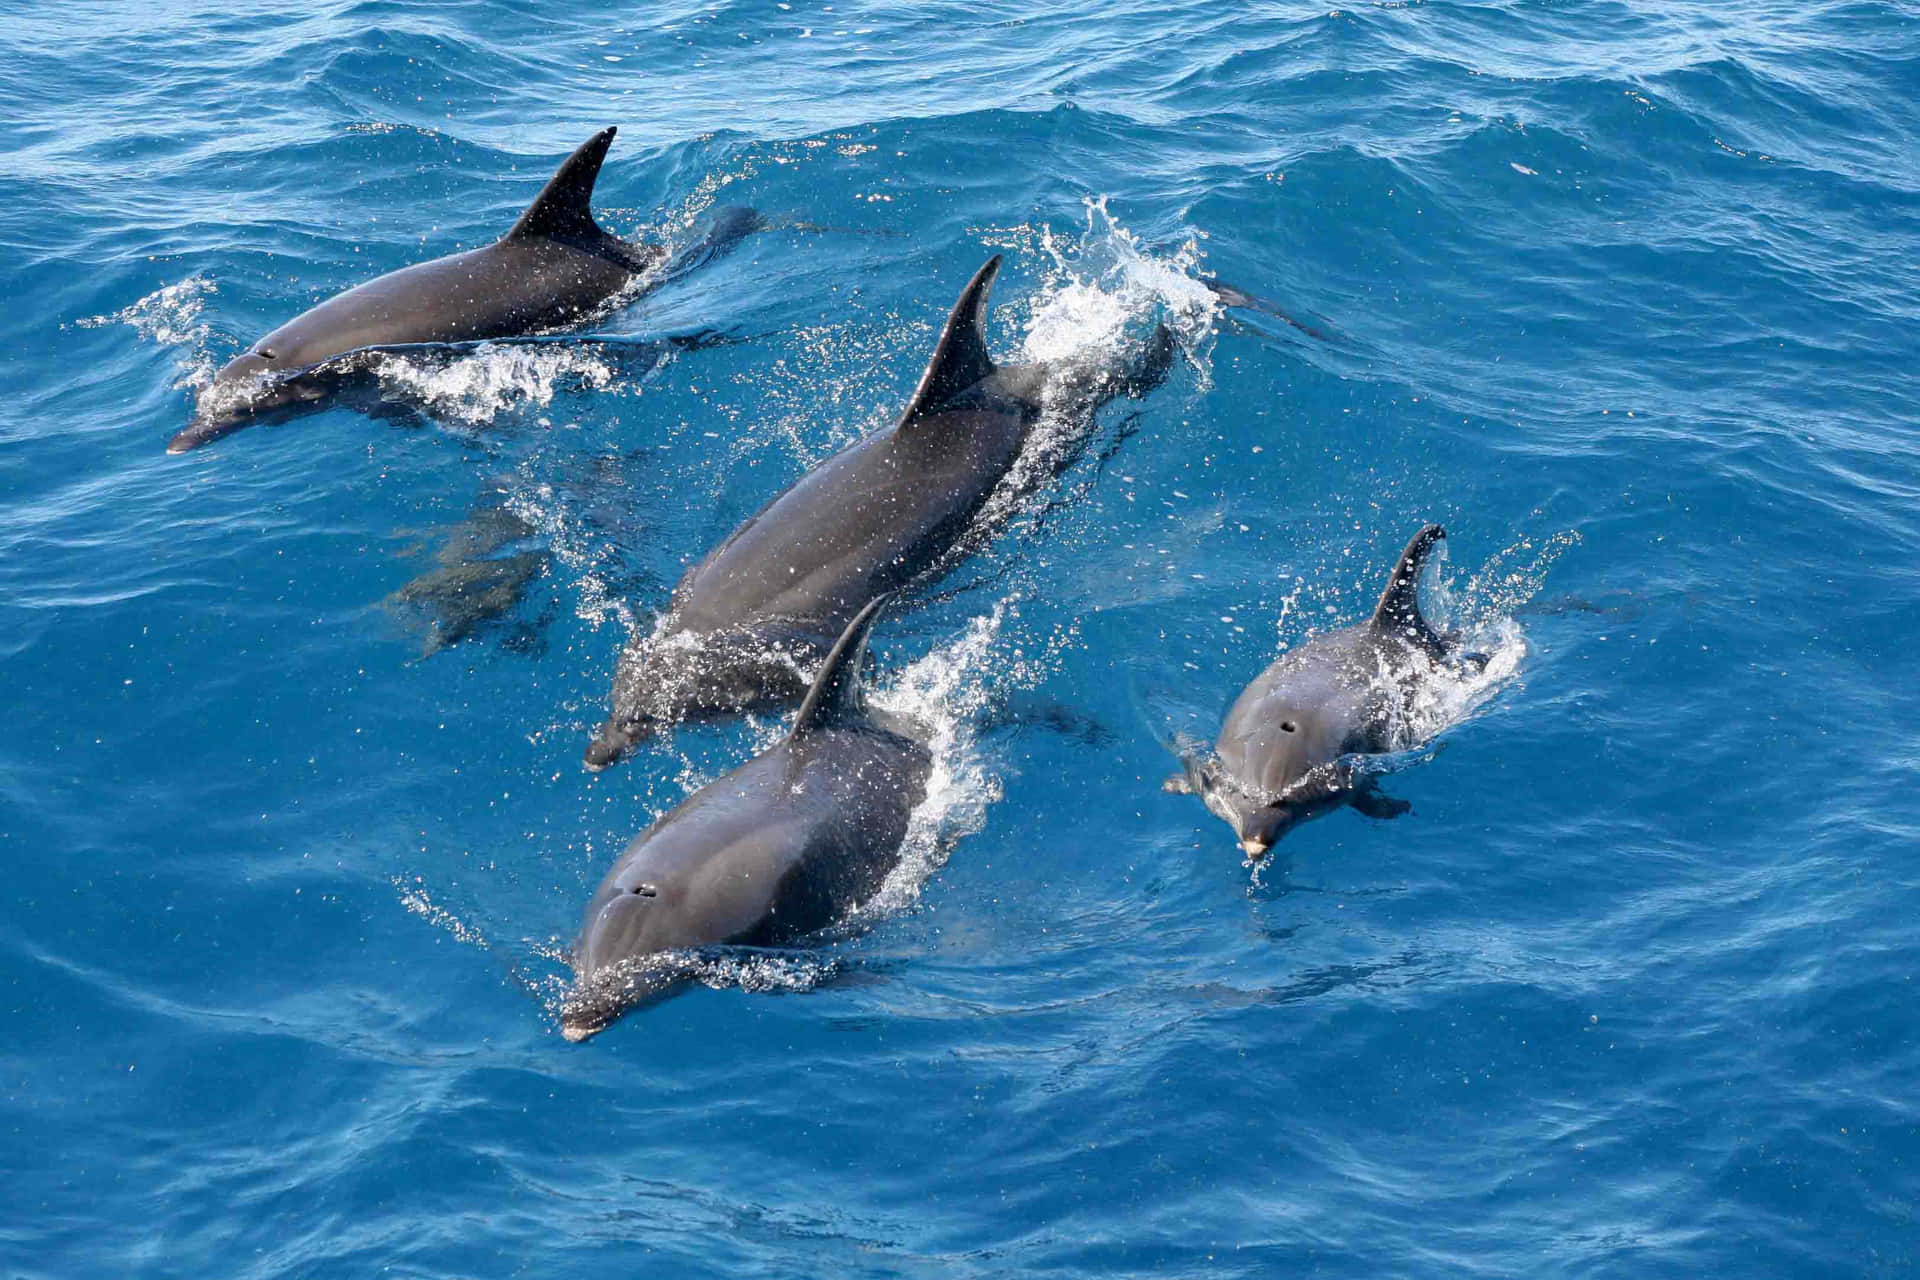 A family of dolphins playing in the water